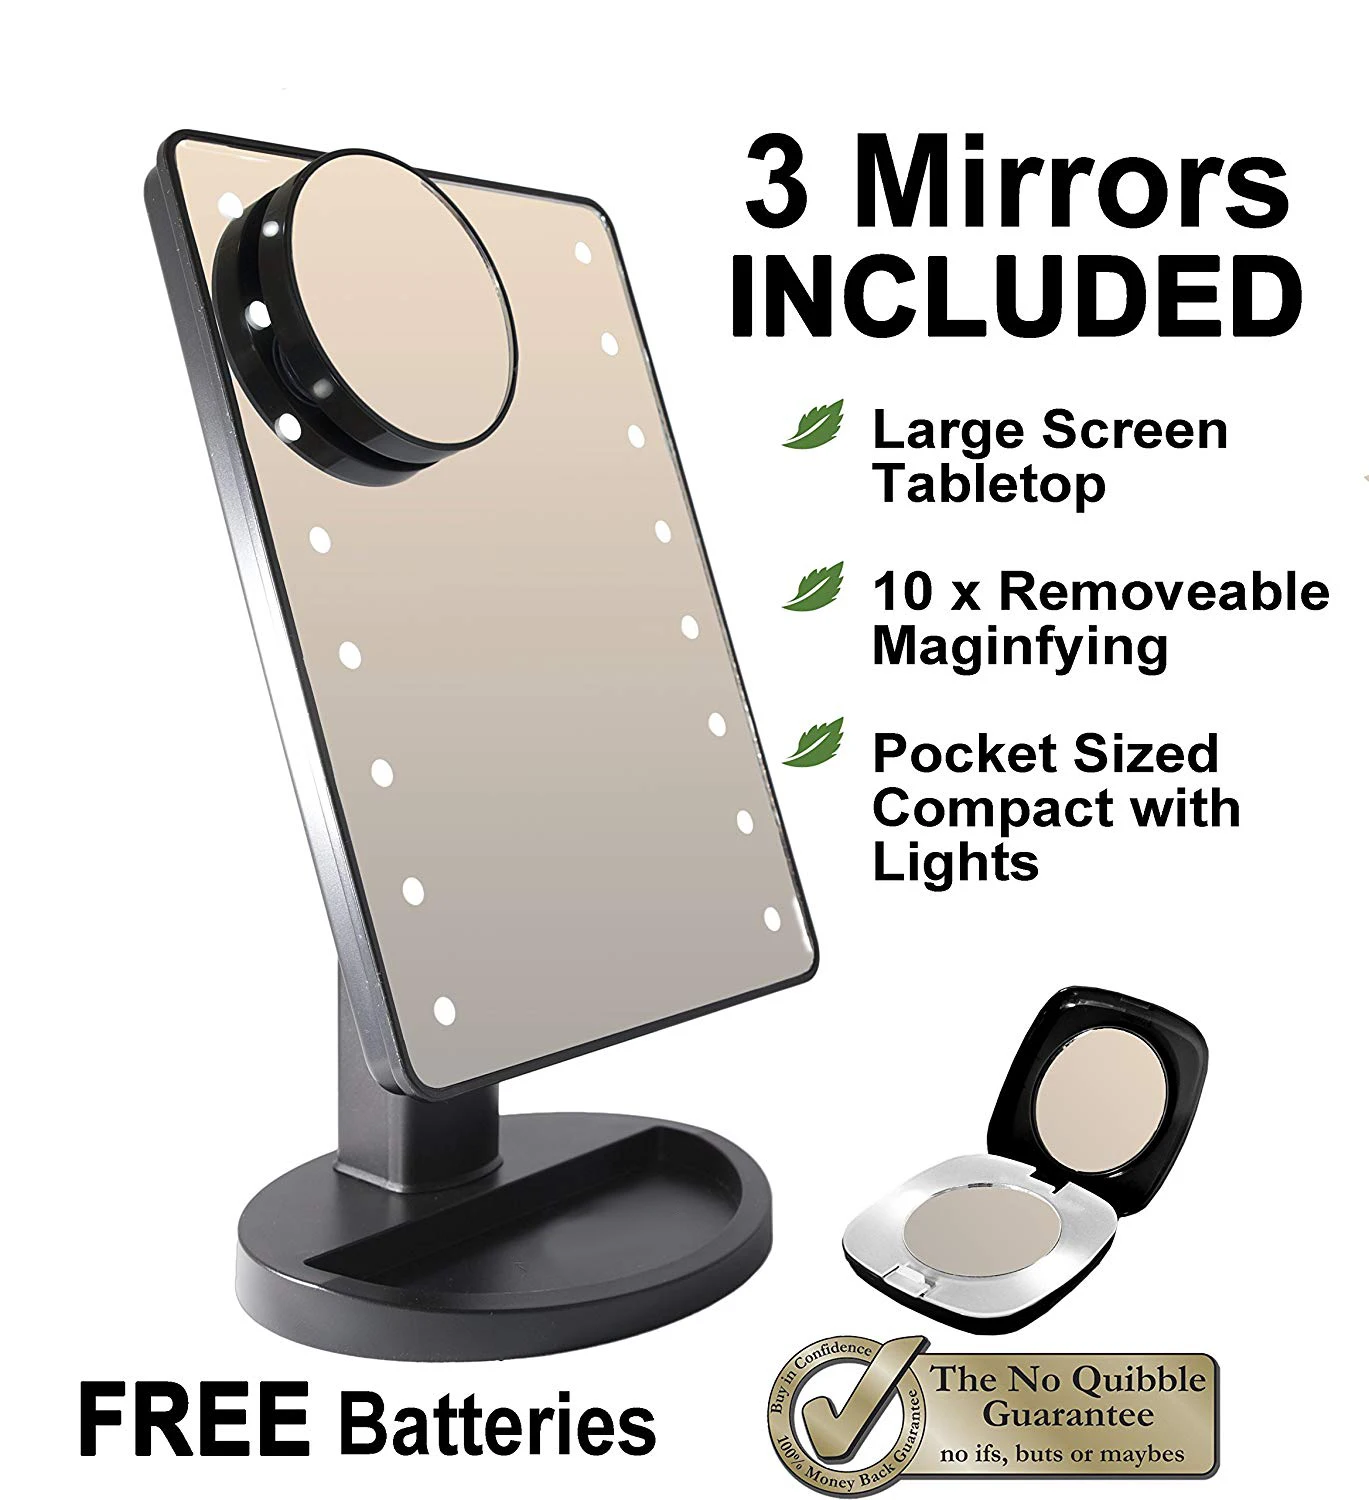 Makeup Mirror 16 LED Lighted Vanity Mirror with Touch Screen and Detachable 10X Magnifying Spot Mirror